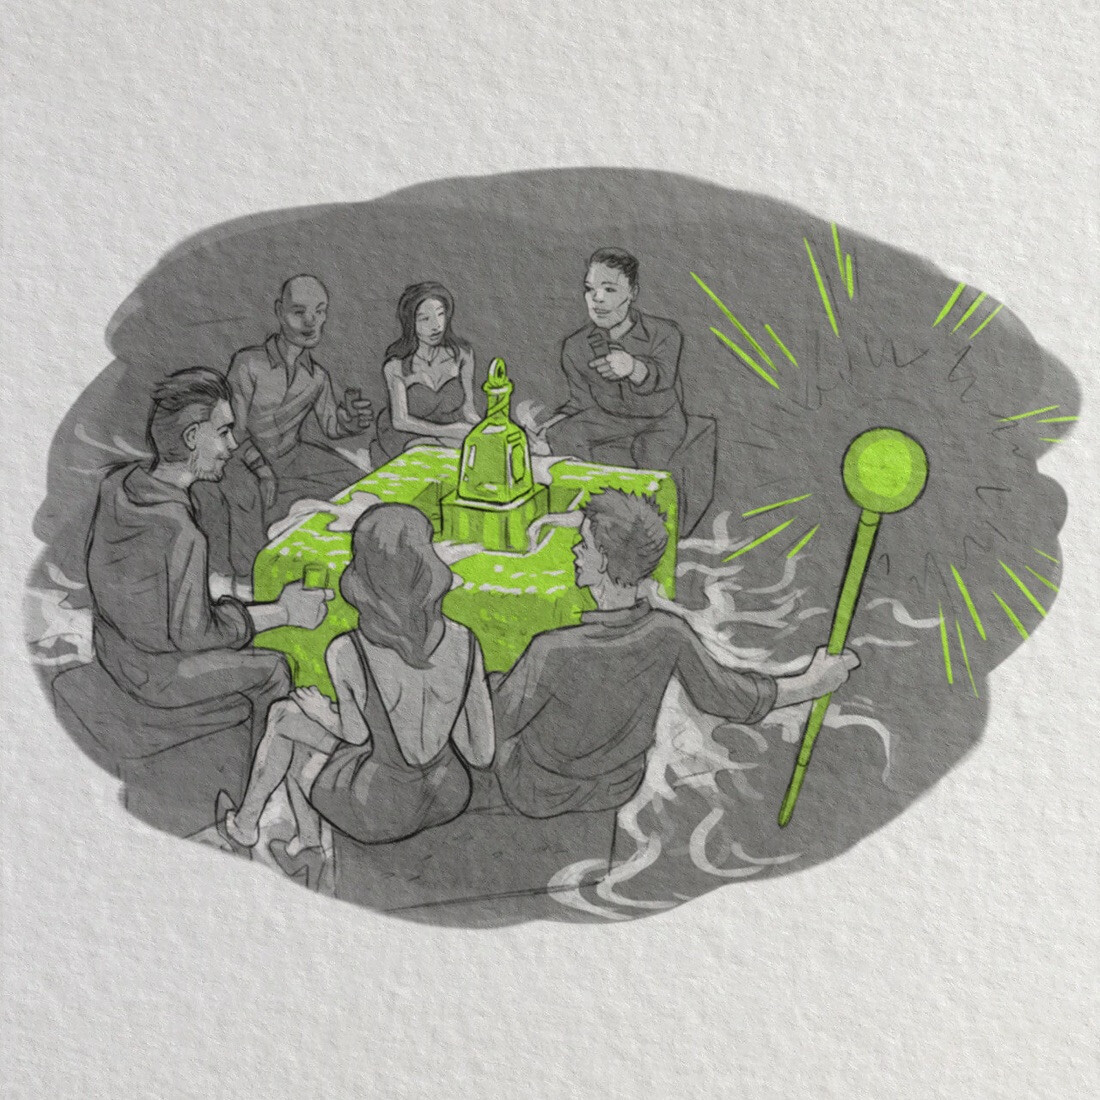 Sketch of bottle brand experience concept: a table area coming to life with a smart device, initiating dancing lights and bursts of smoke.